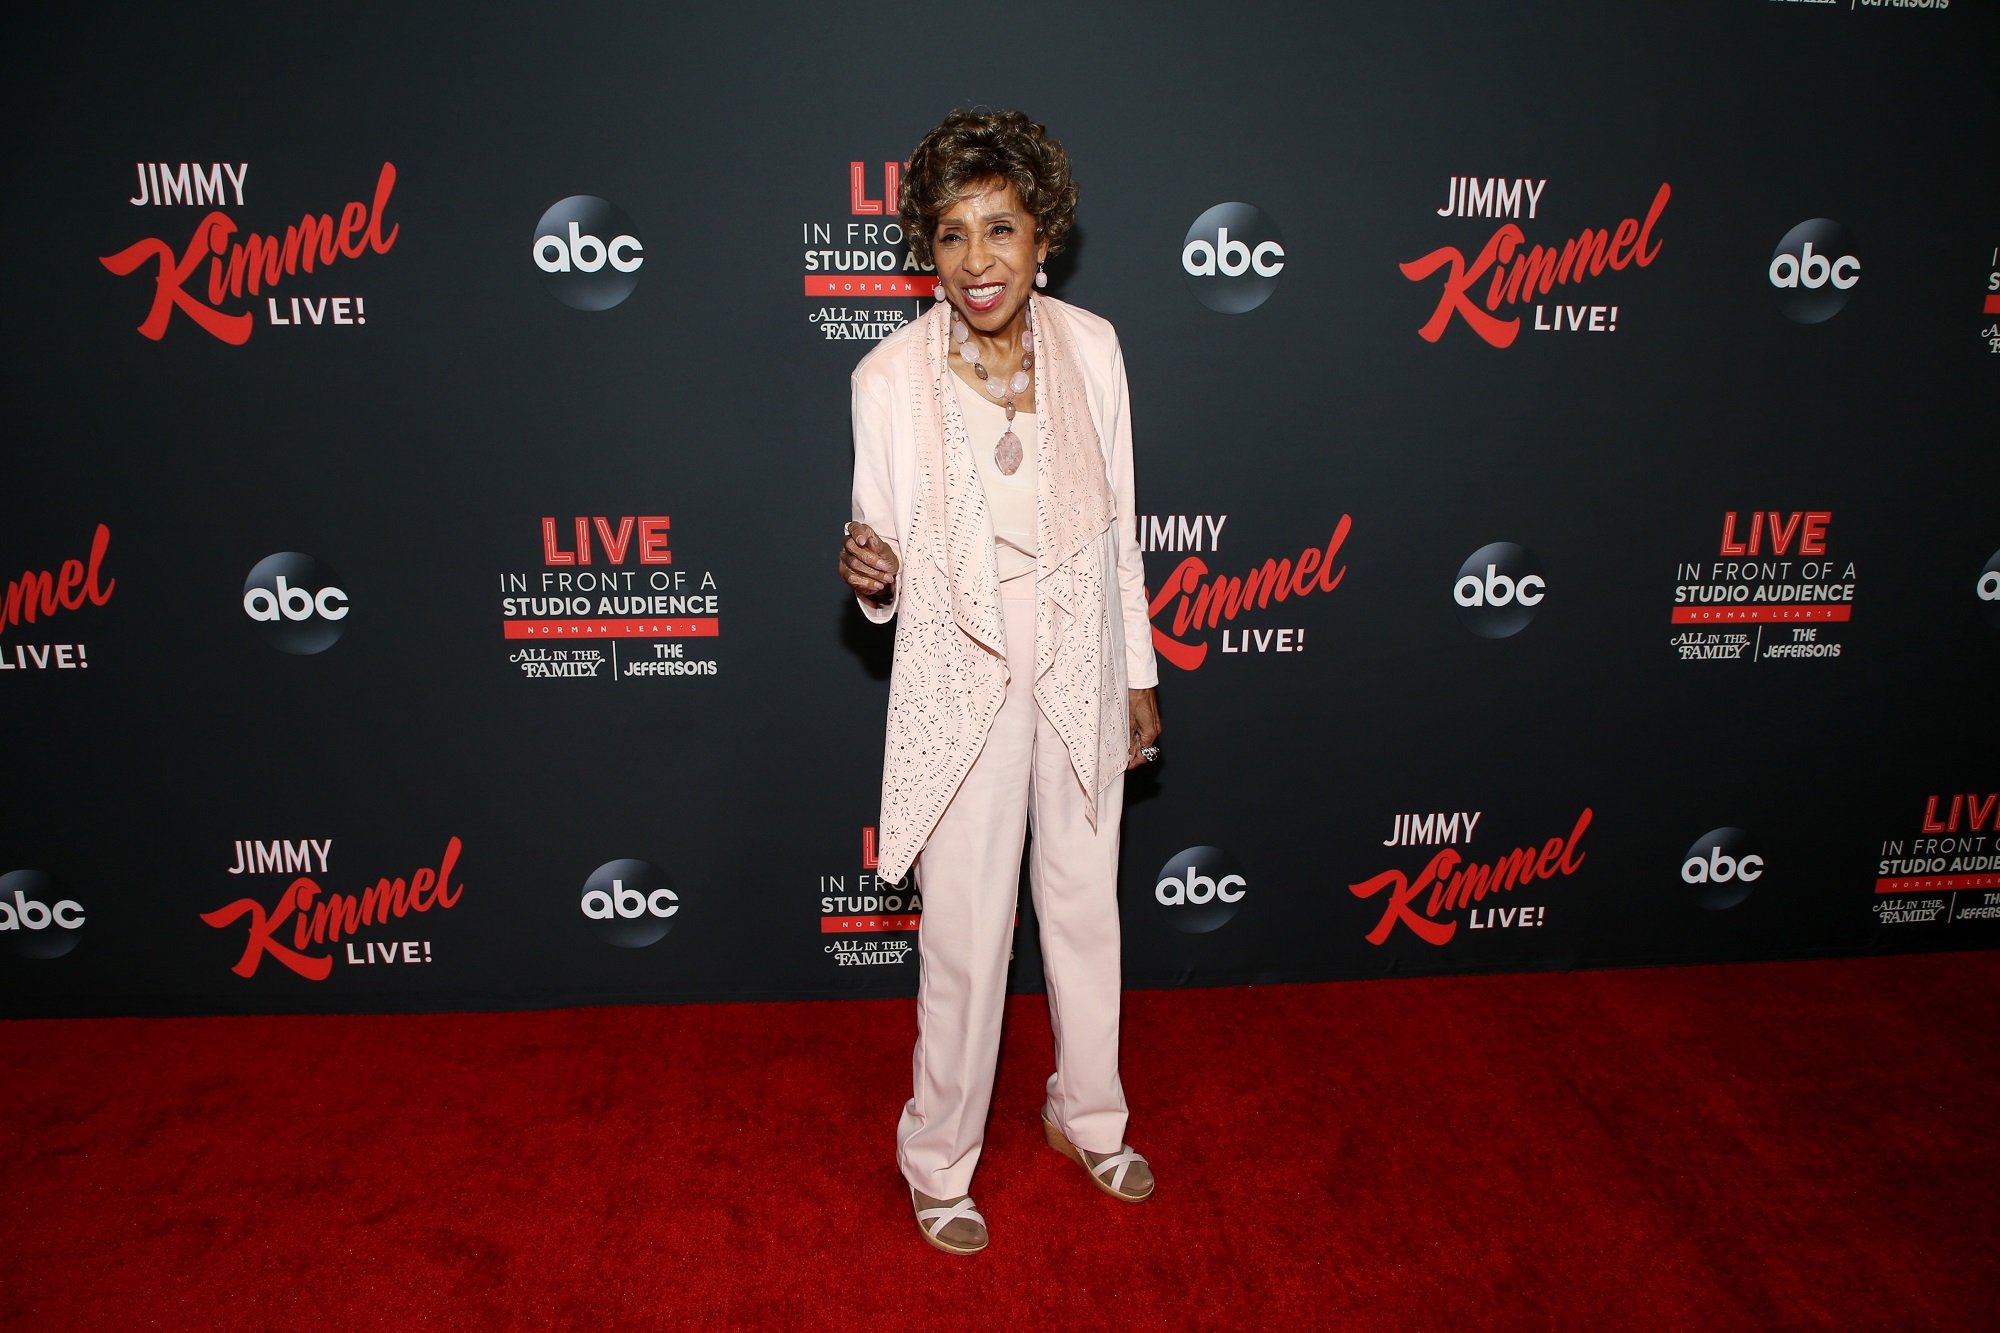 Days of Our Lives stars Marla Gibbs, pictured here in a pink suit on the red carpet